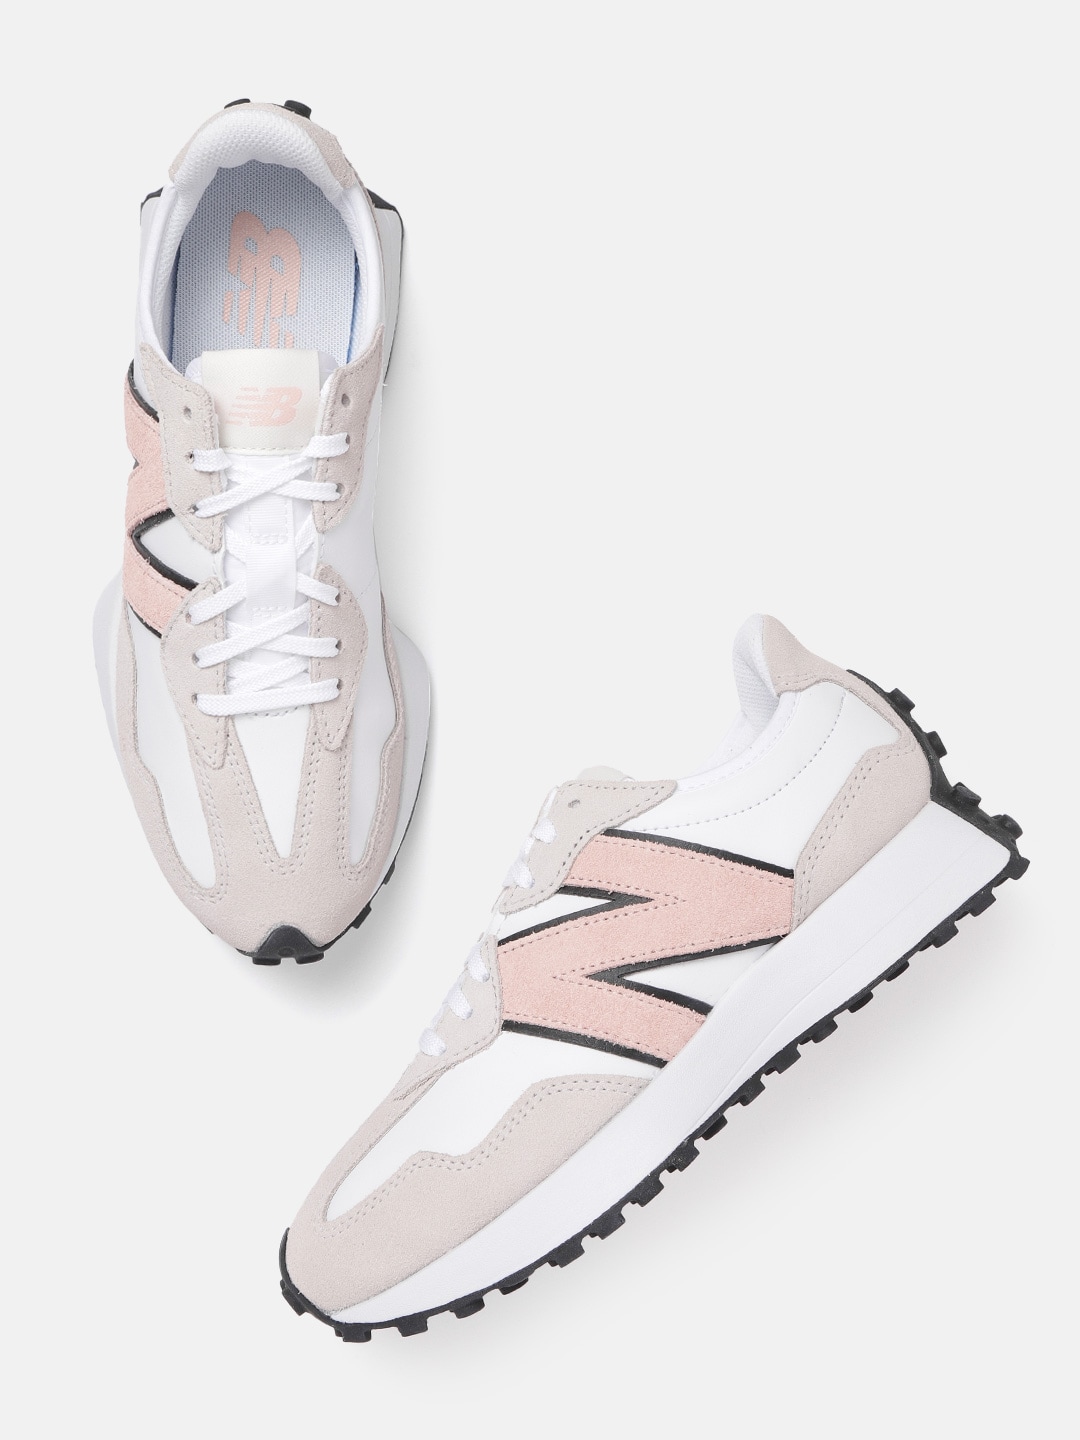 New Balance Women Beige & White Colourblocked Driver Sneakers Price in India